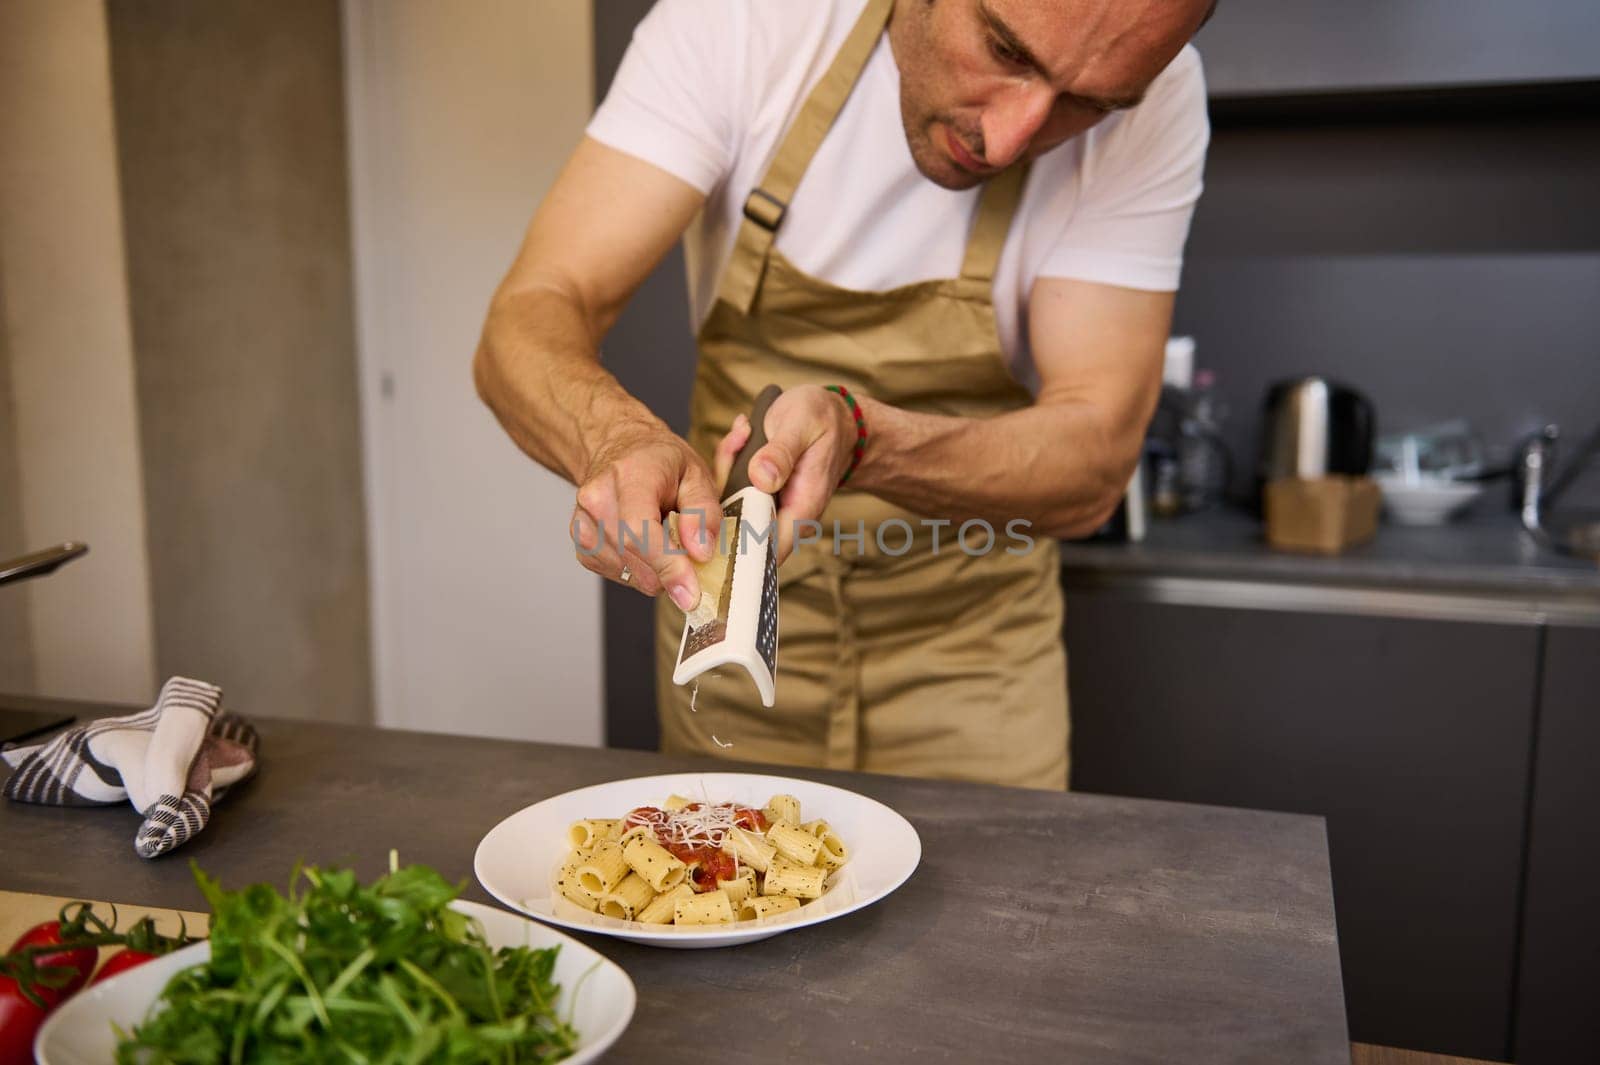 Close-up chef cooking dinner in stylish modern minimalist home kitchen interior, grating parmesan cheese over a plate with freshly boiled pasta with tomato sauce. Ingredients on the kitchen countertop